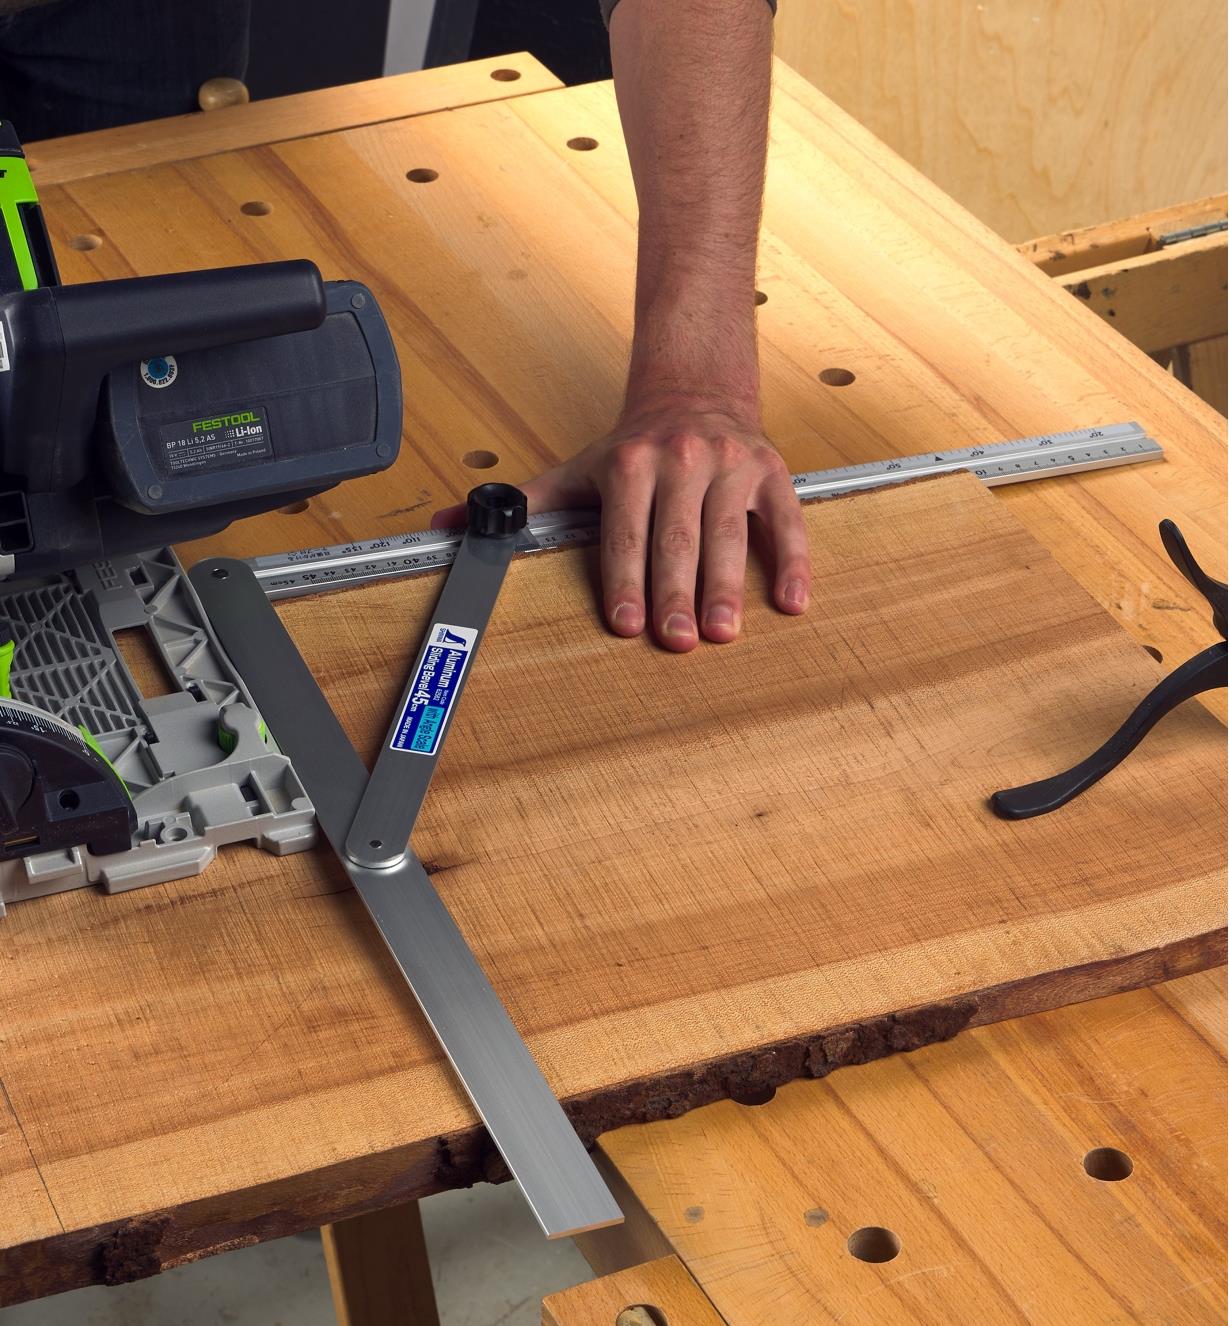 Using a large aluminum bevel as a cutting guide for a circular saw